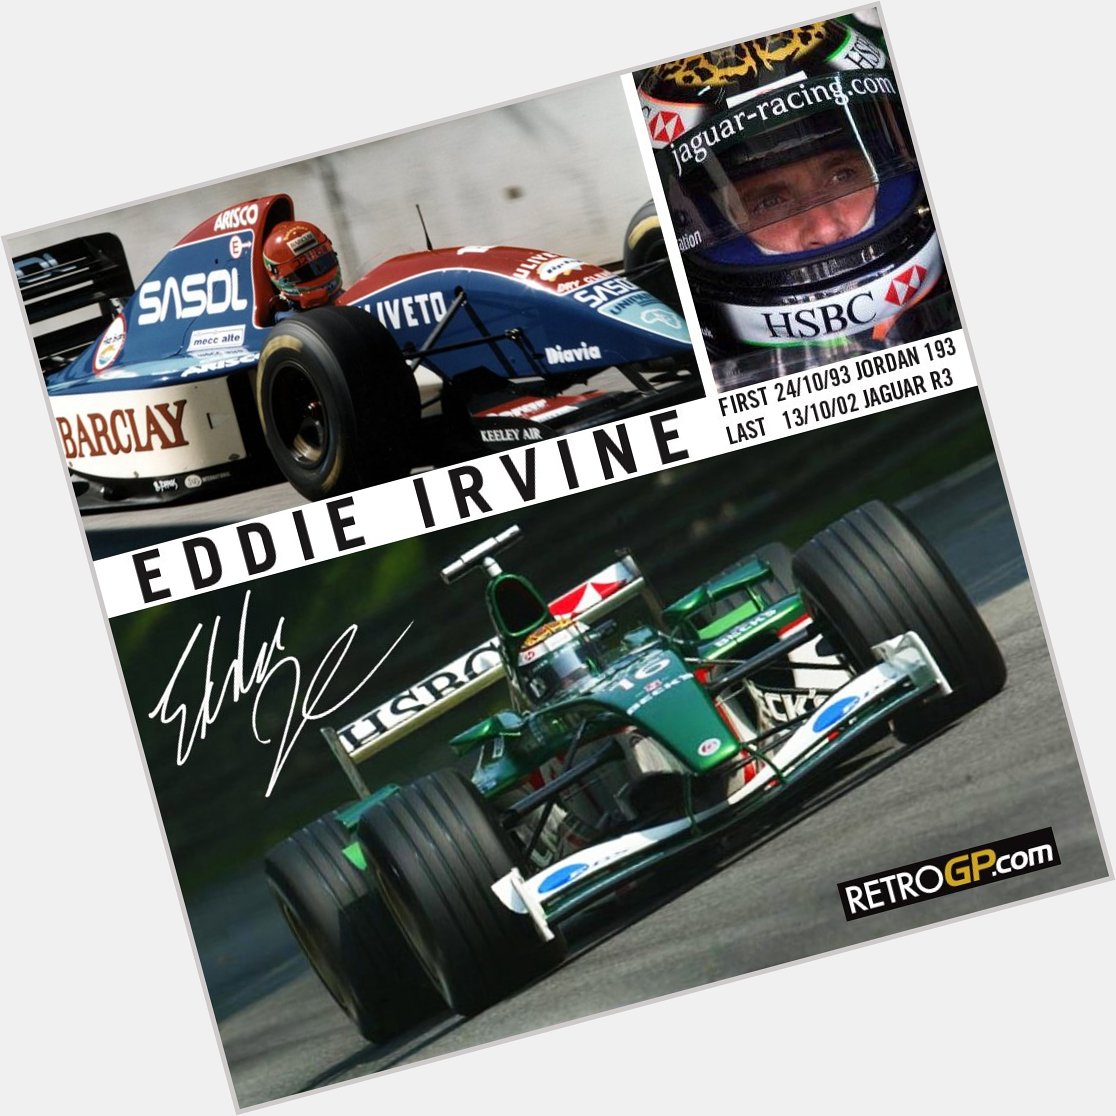 Happy Birthday to Eddie Irvine who hits the BIG 5 Oh today. A few Shandy\s tonight maybe? 